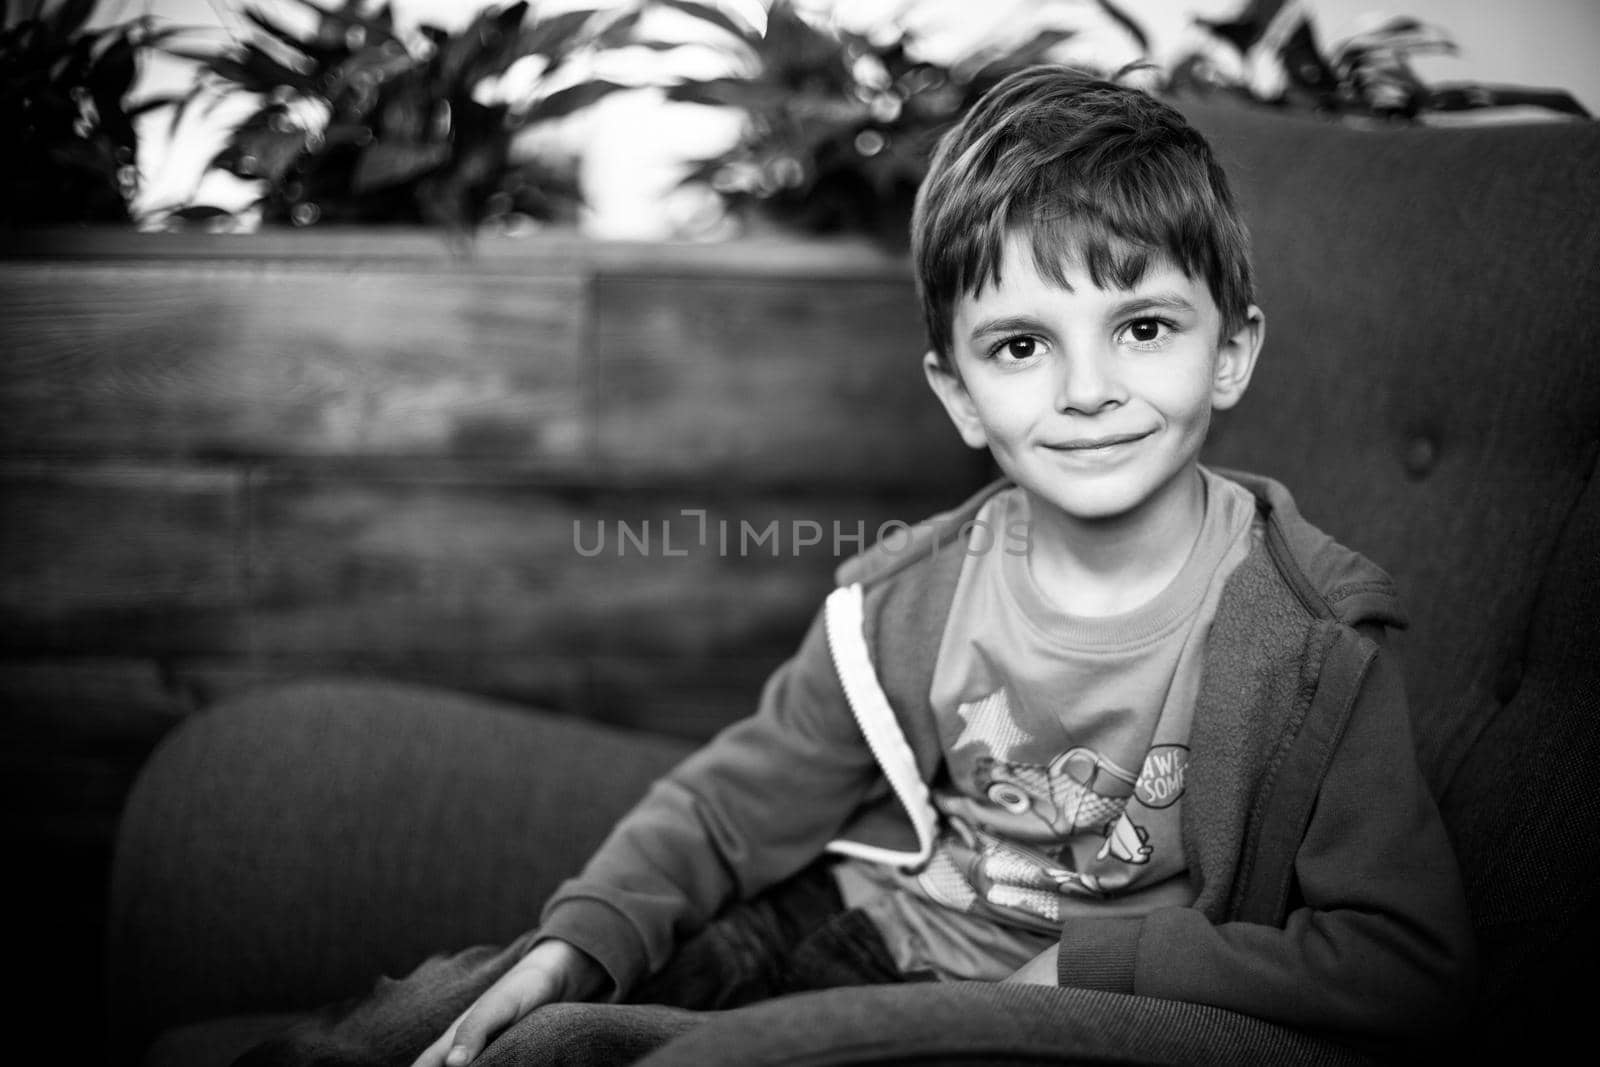 smiling young boy sitting on the sofa looking at camera, black and white shot